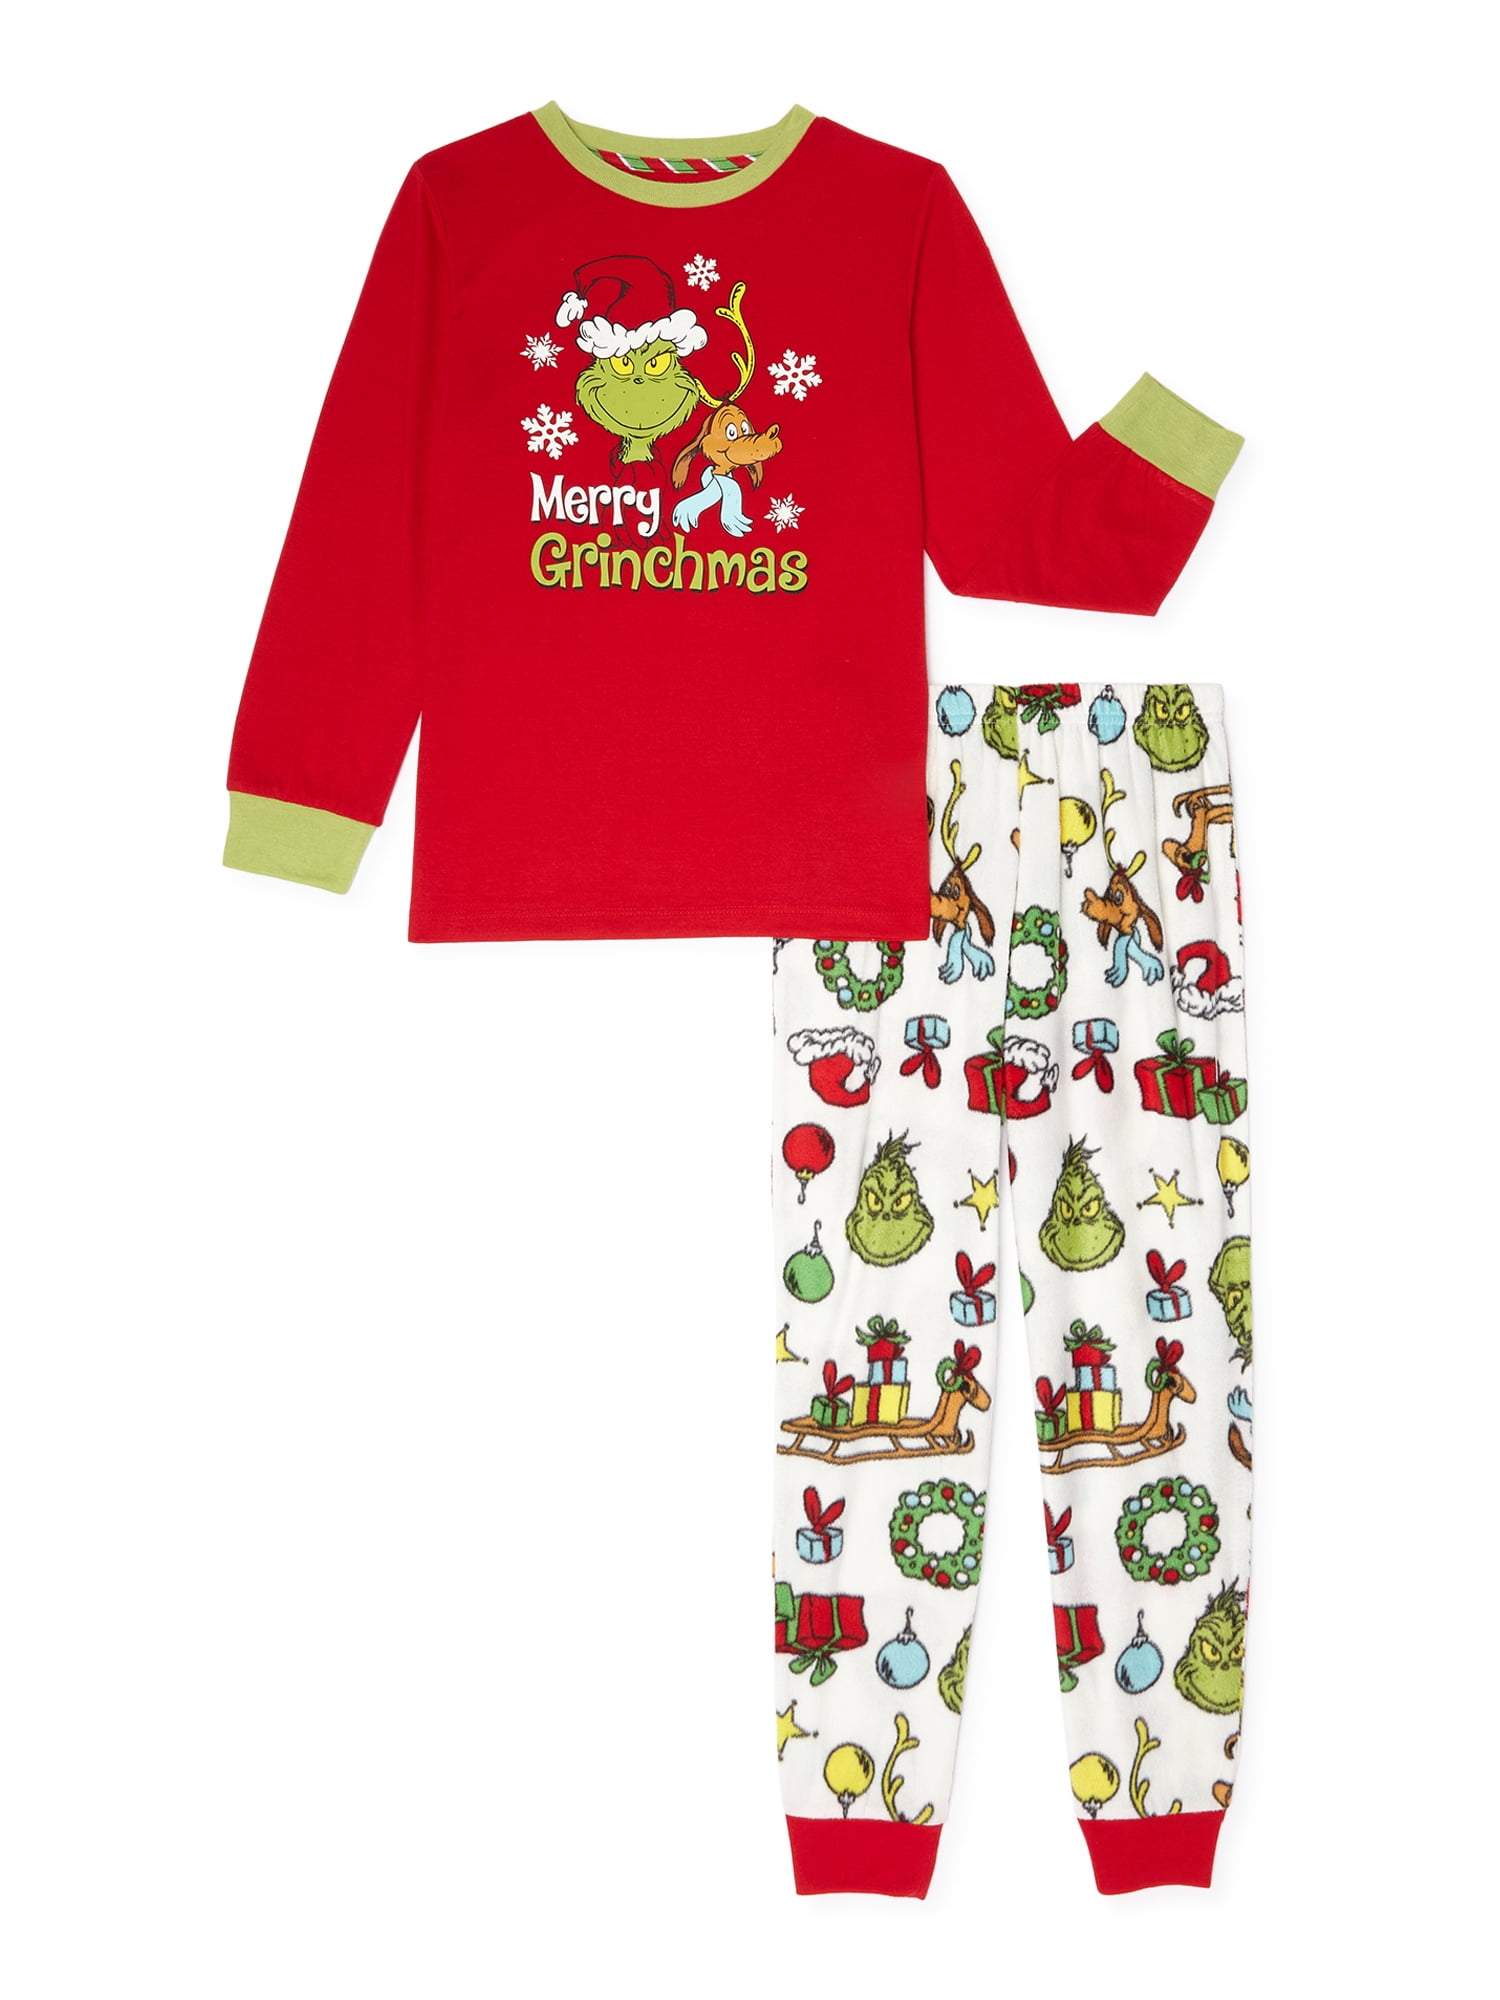 Fashion Men's Clothing, Shoes & Accessories NEW Holiday Family Pajamas ...